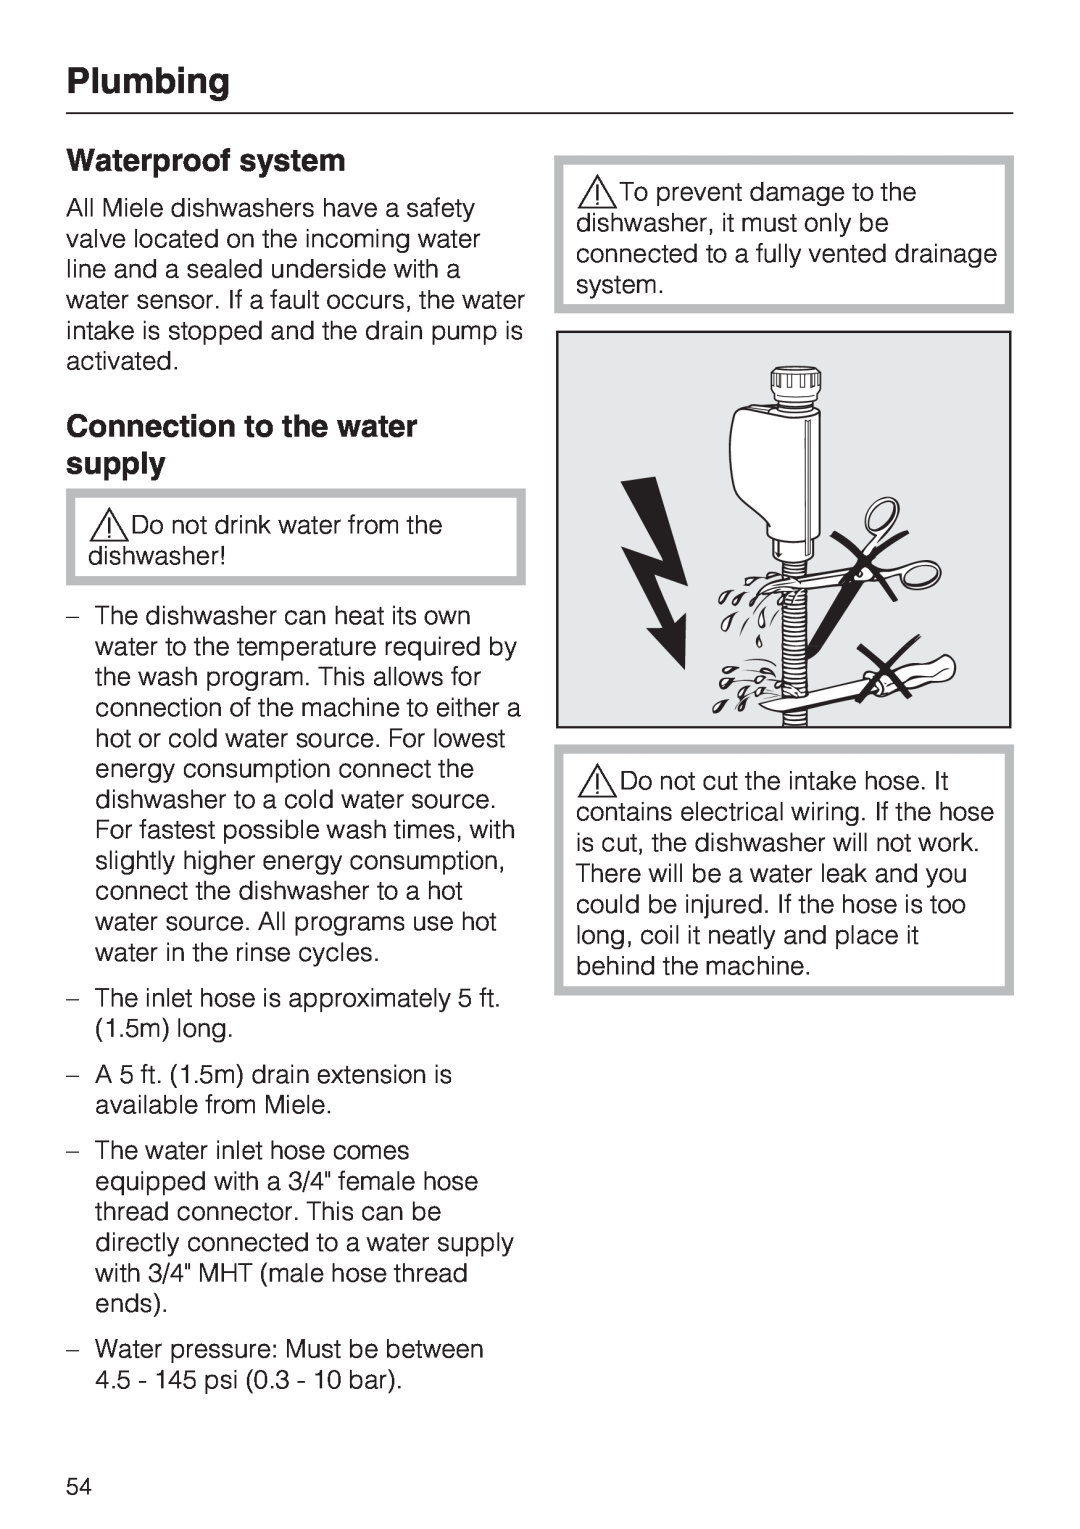 Miele G2142 operating instructions Plumbing, Waterproof system, Connection to the water supply 